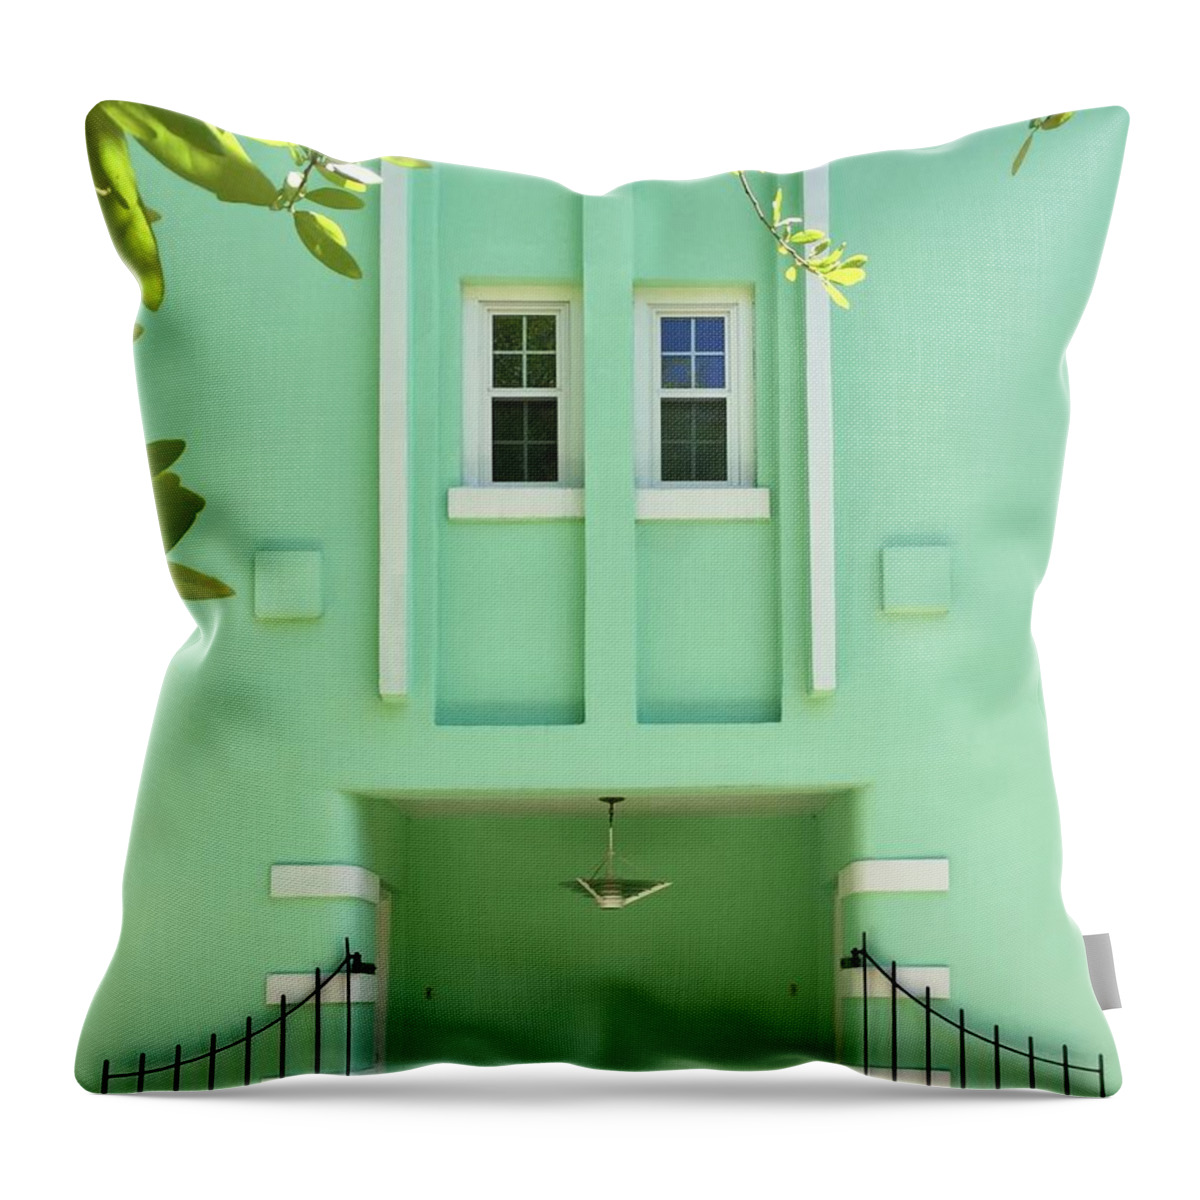 Turquoise House Throw Pillow featuring the photograph Turquoise House by Flavia Westerwelle